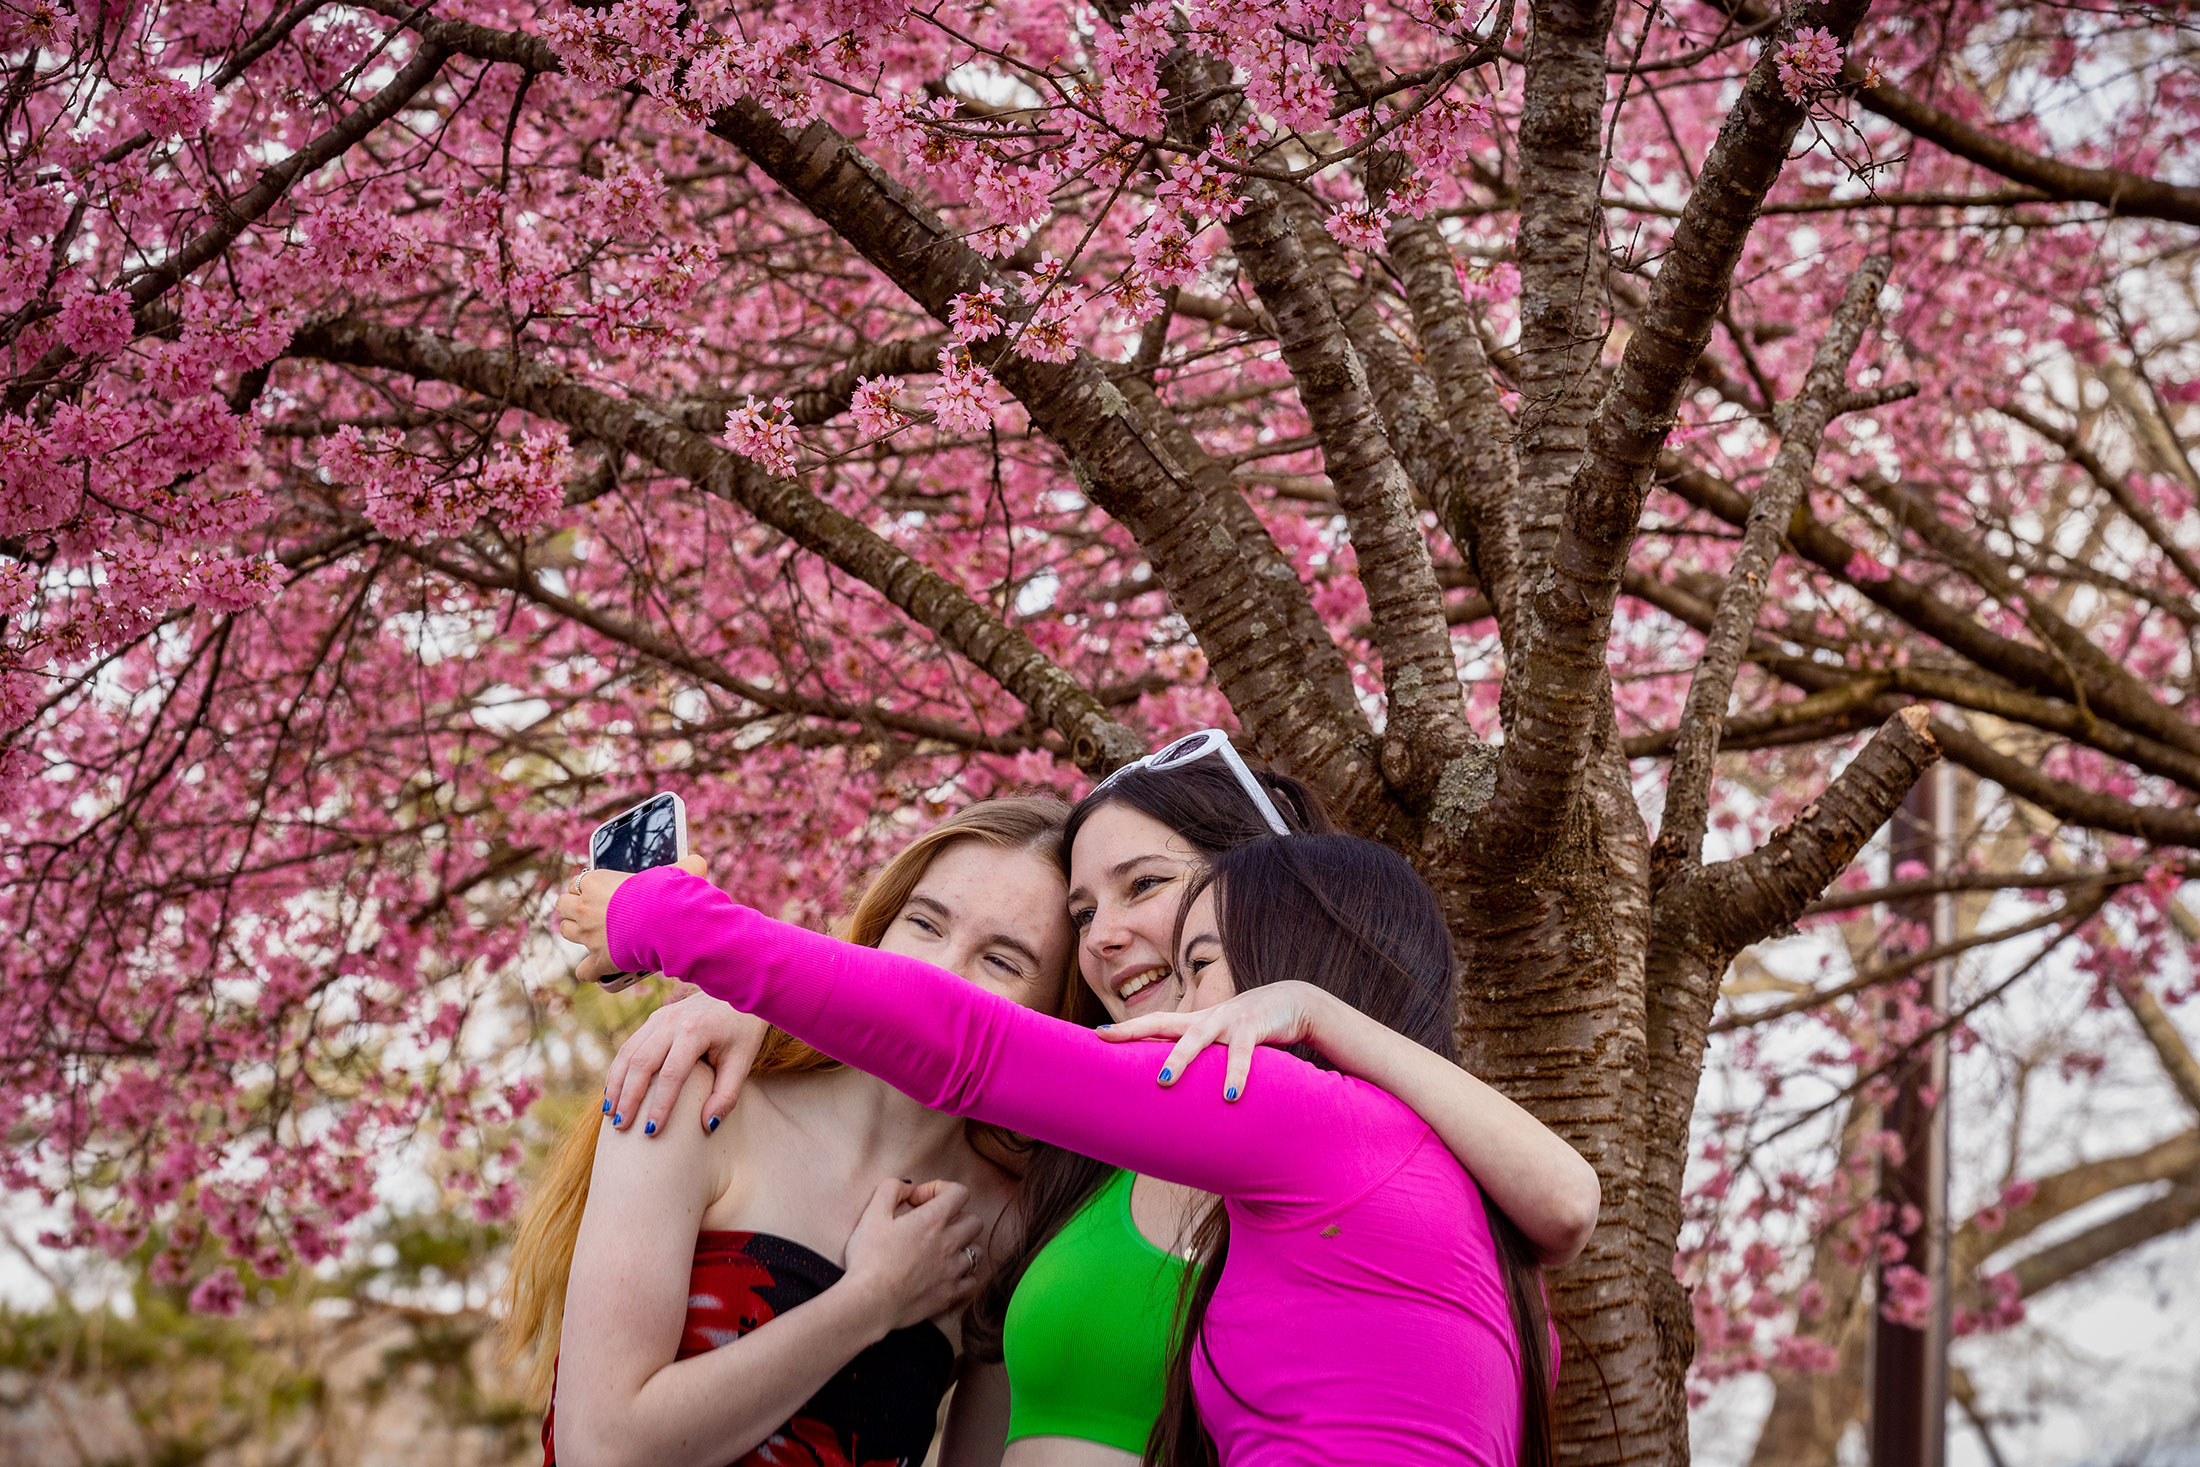 Three girls taking a selfie by the apricot tree.
